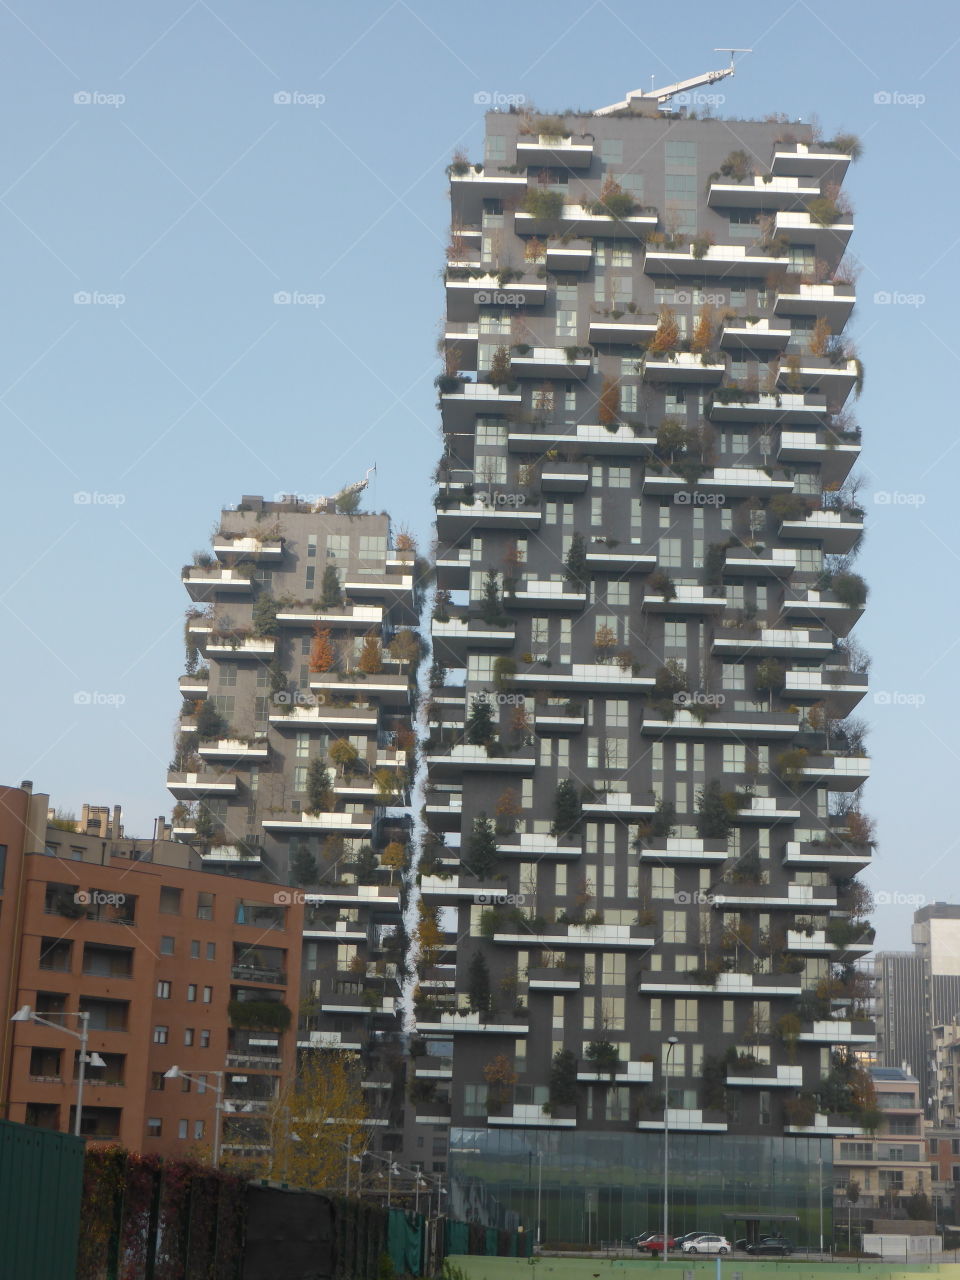 A strange residential building in Milan,Italy